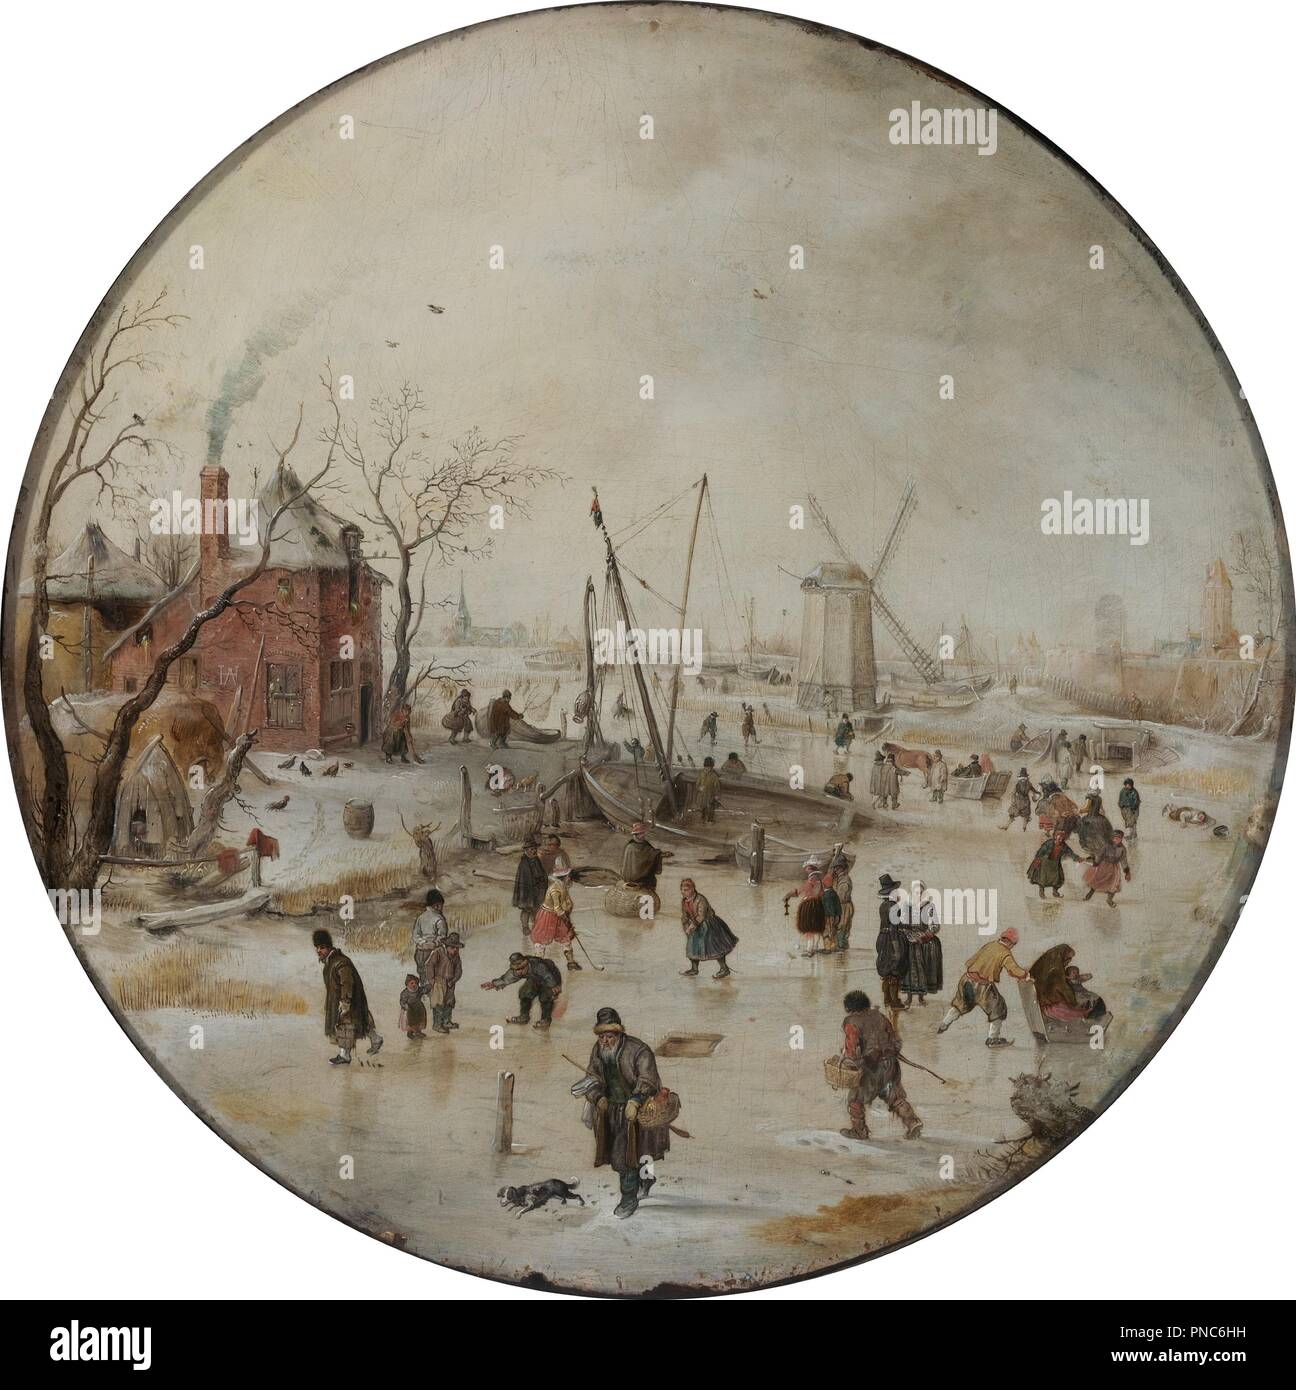 Frozen River with Skaters. Date/Period: 1620s. Painting. Oil on oak. Diameter: 30.5 cm (12 in). Author: HENDRICK AVERCAMP. Stock Photo